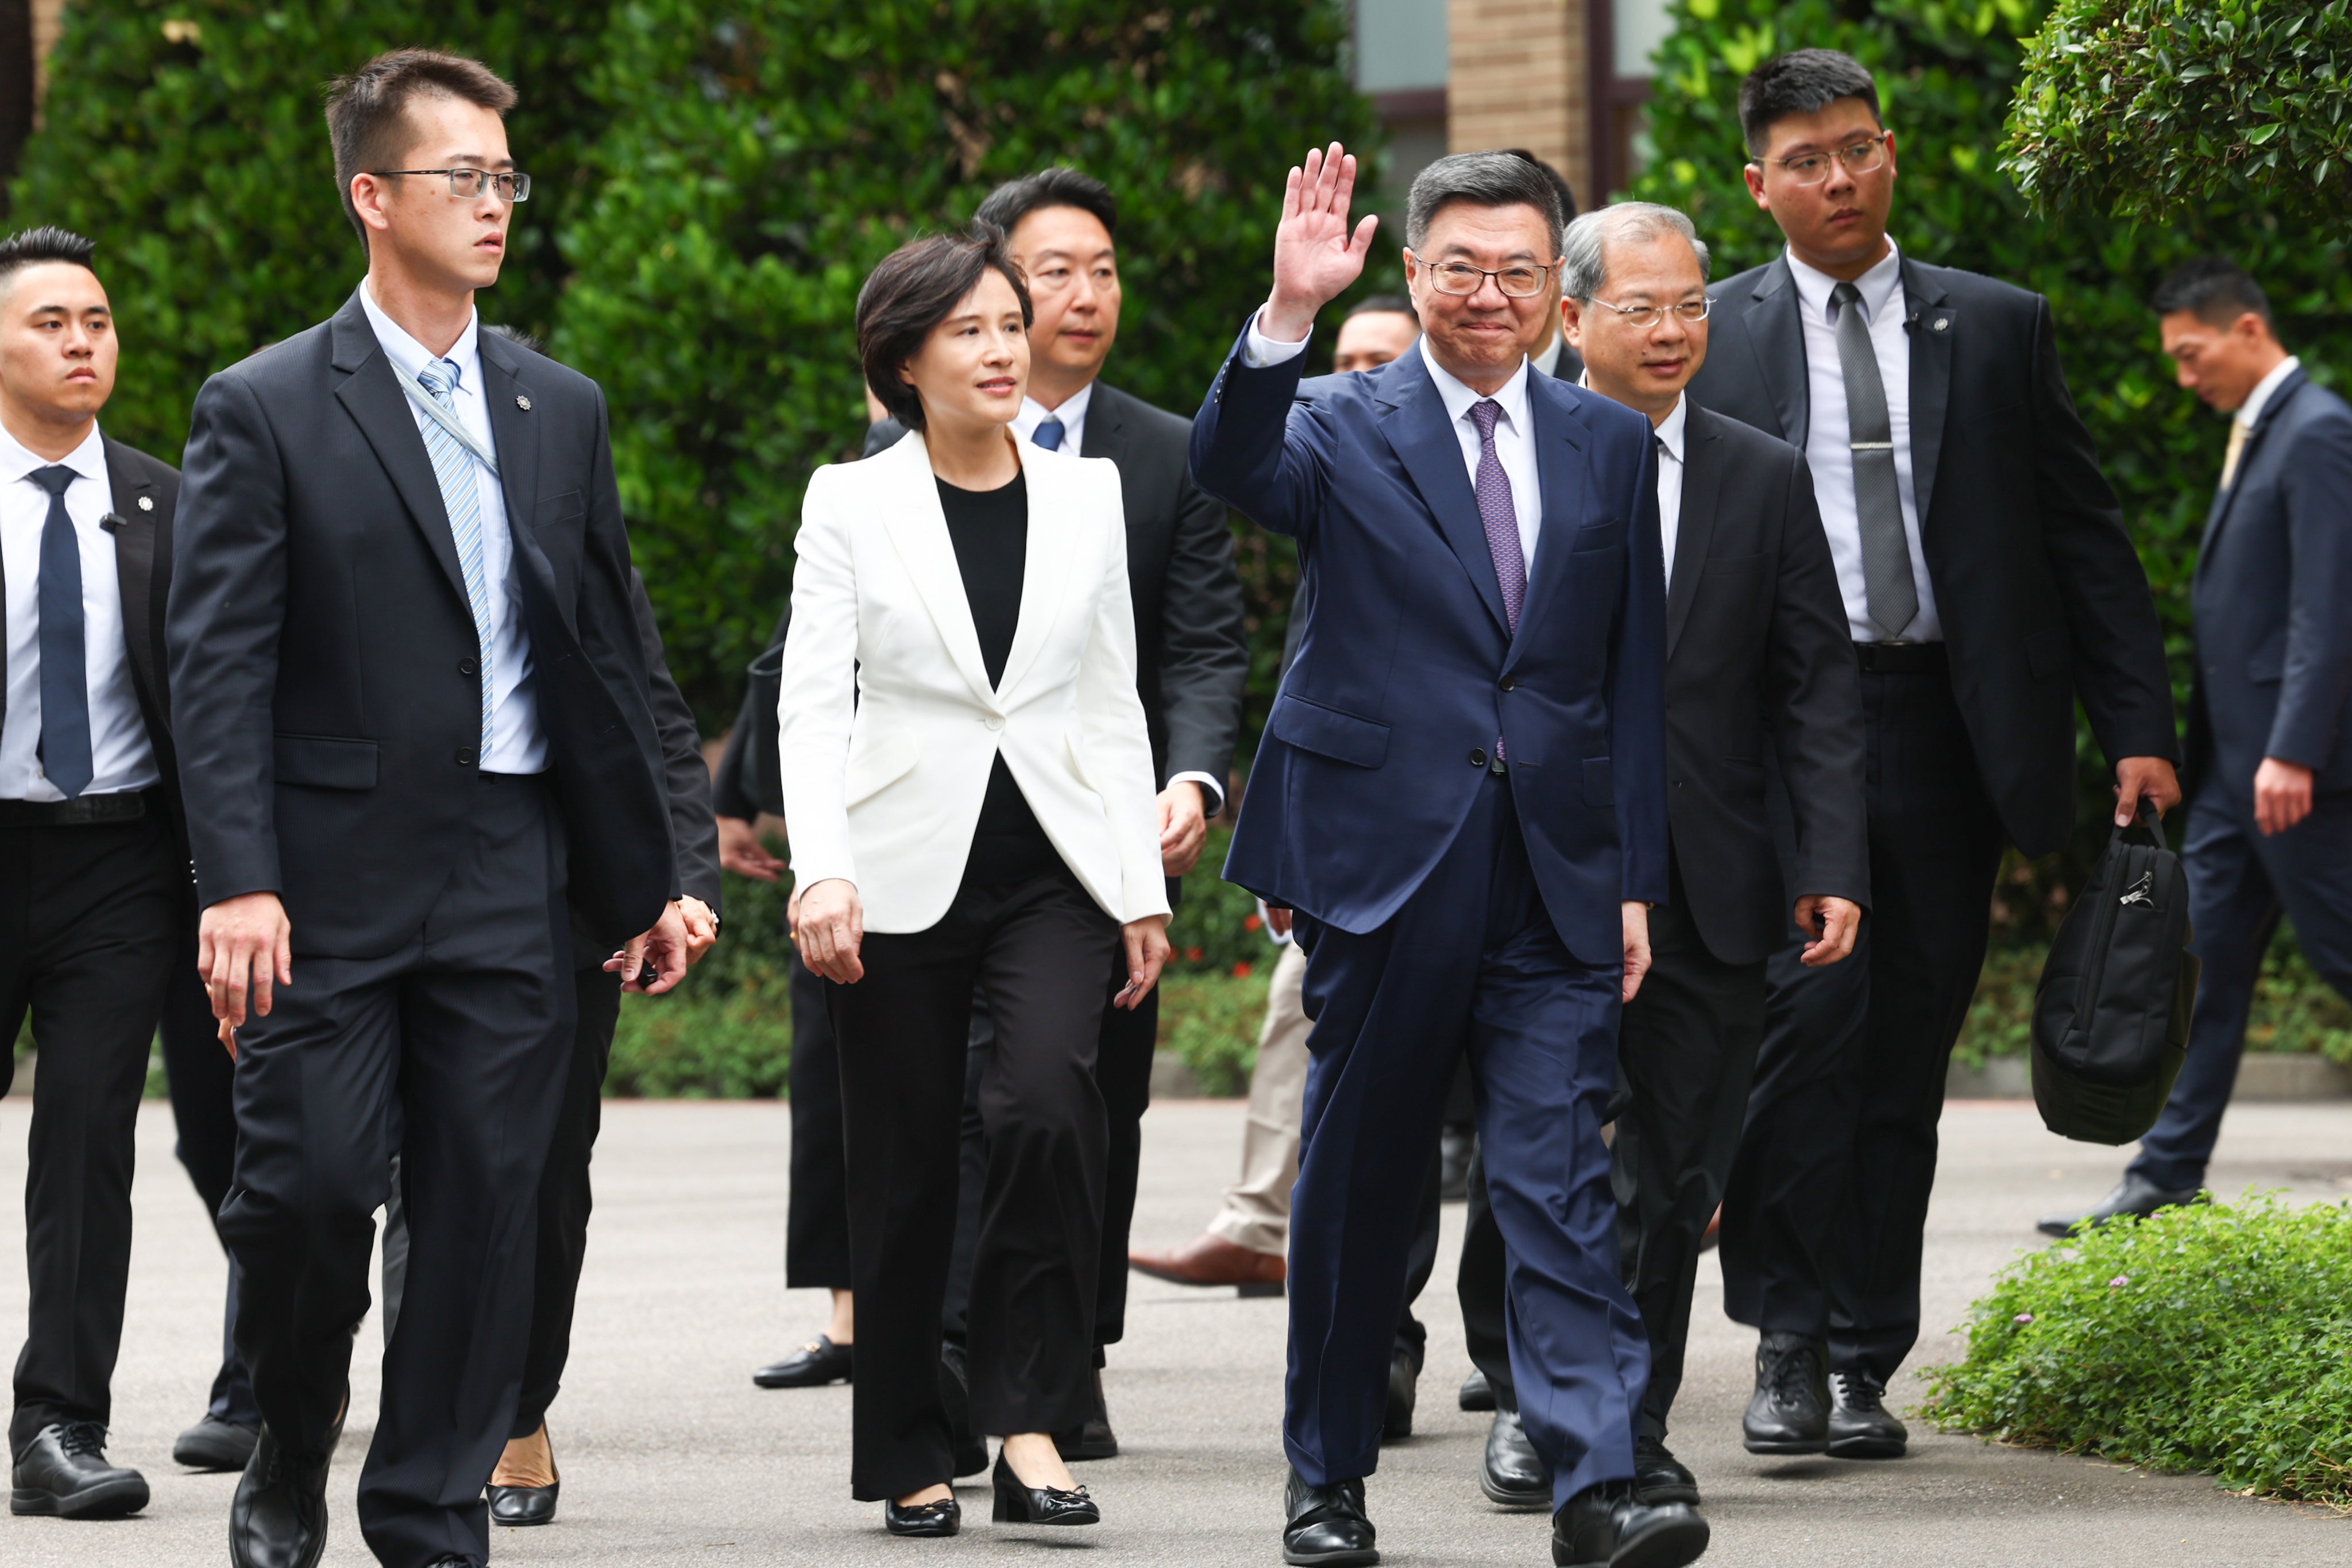 The new cabinet chief Cho Jung-tai (centre, right) and his deputy Cheng Li-chun (centre, left) on their way to the Executive Yuan on Monday. Photo: CNA